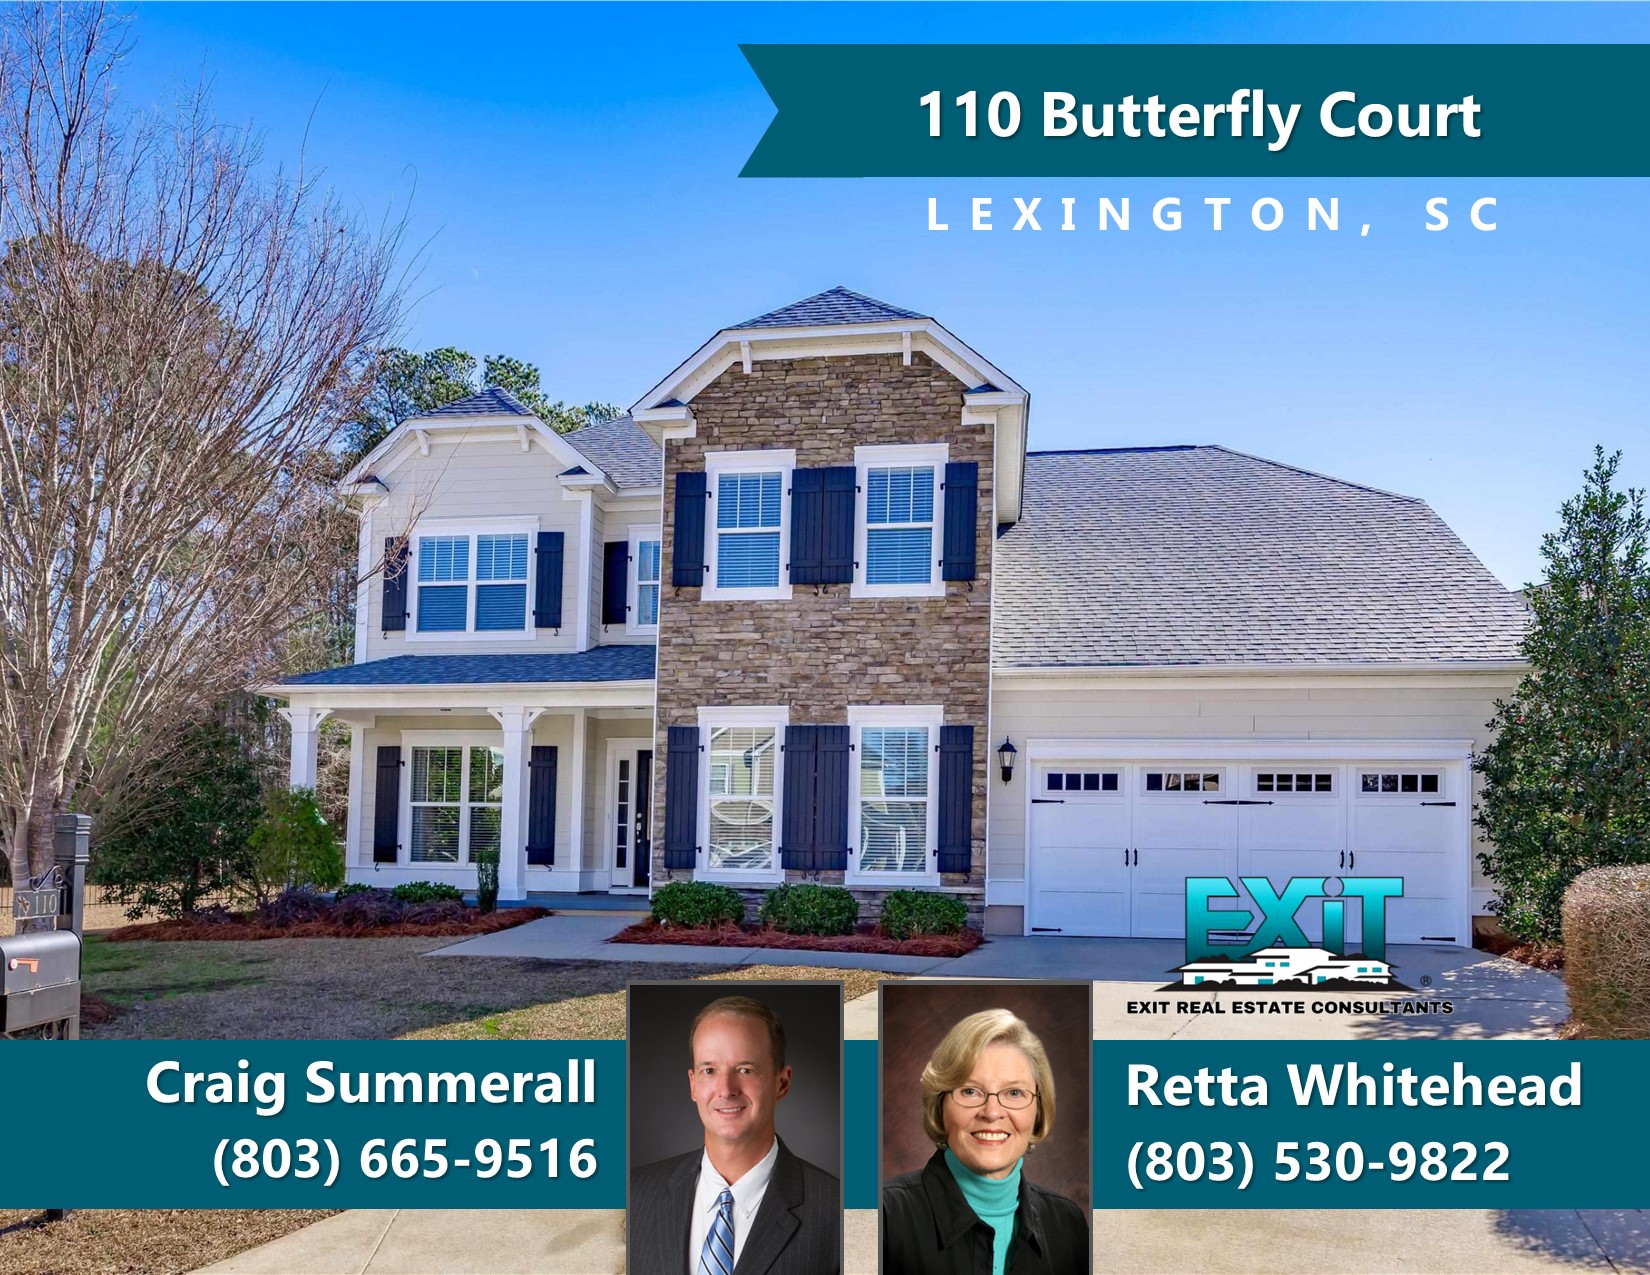 Just listed in Summerlake - Lexington